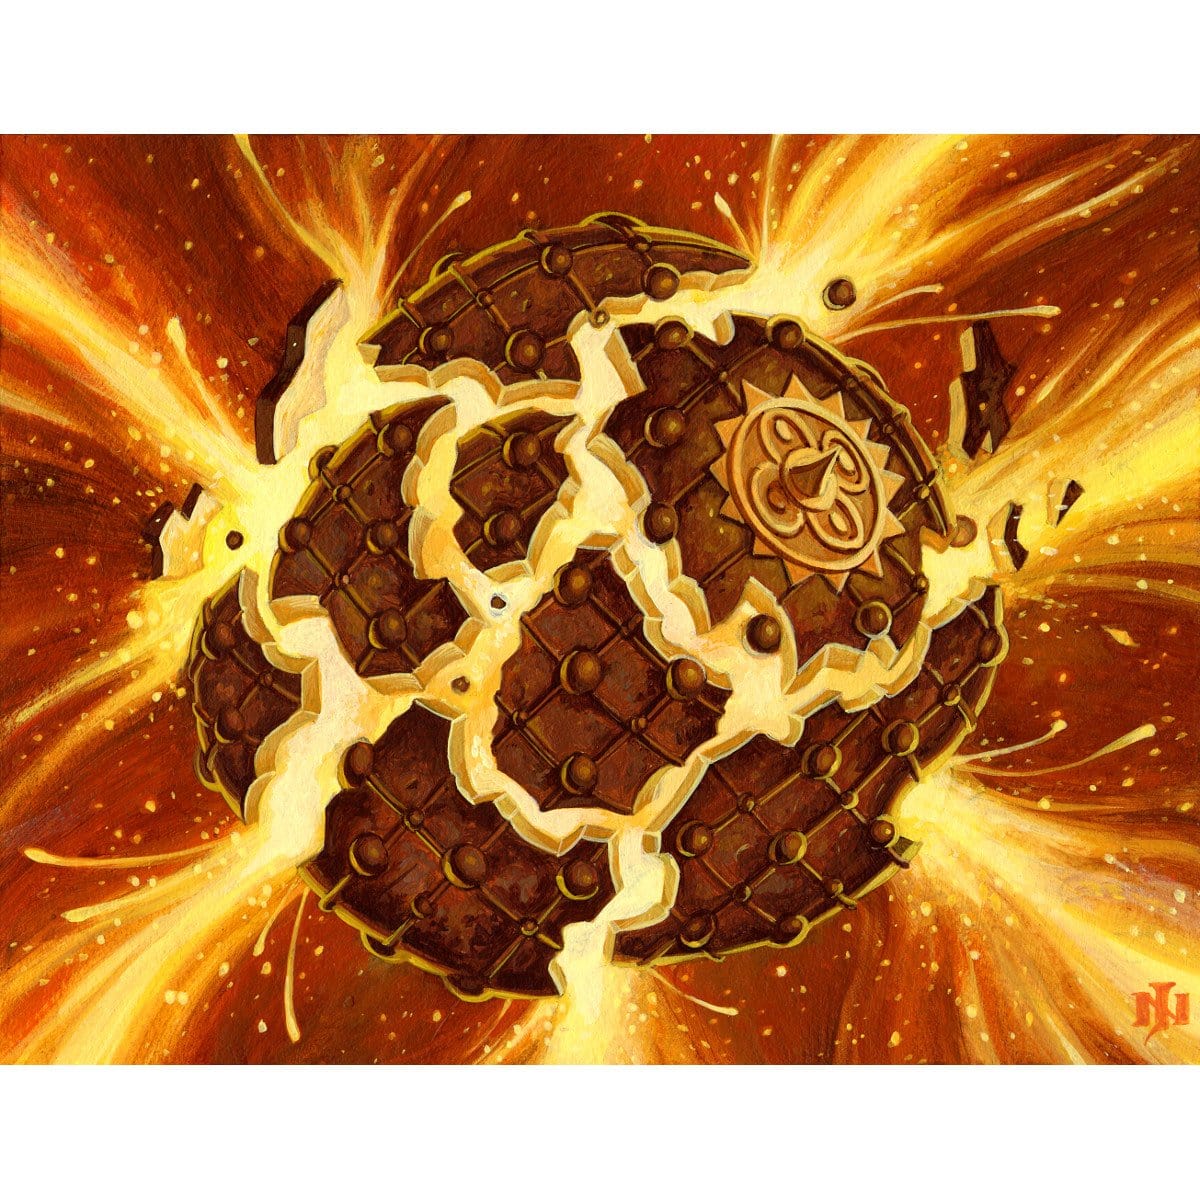 Pyrite Spellbomb Print - Print - Original Magic Art - Accessories for Magic the Gathering and other card games